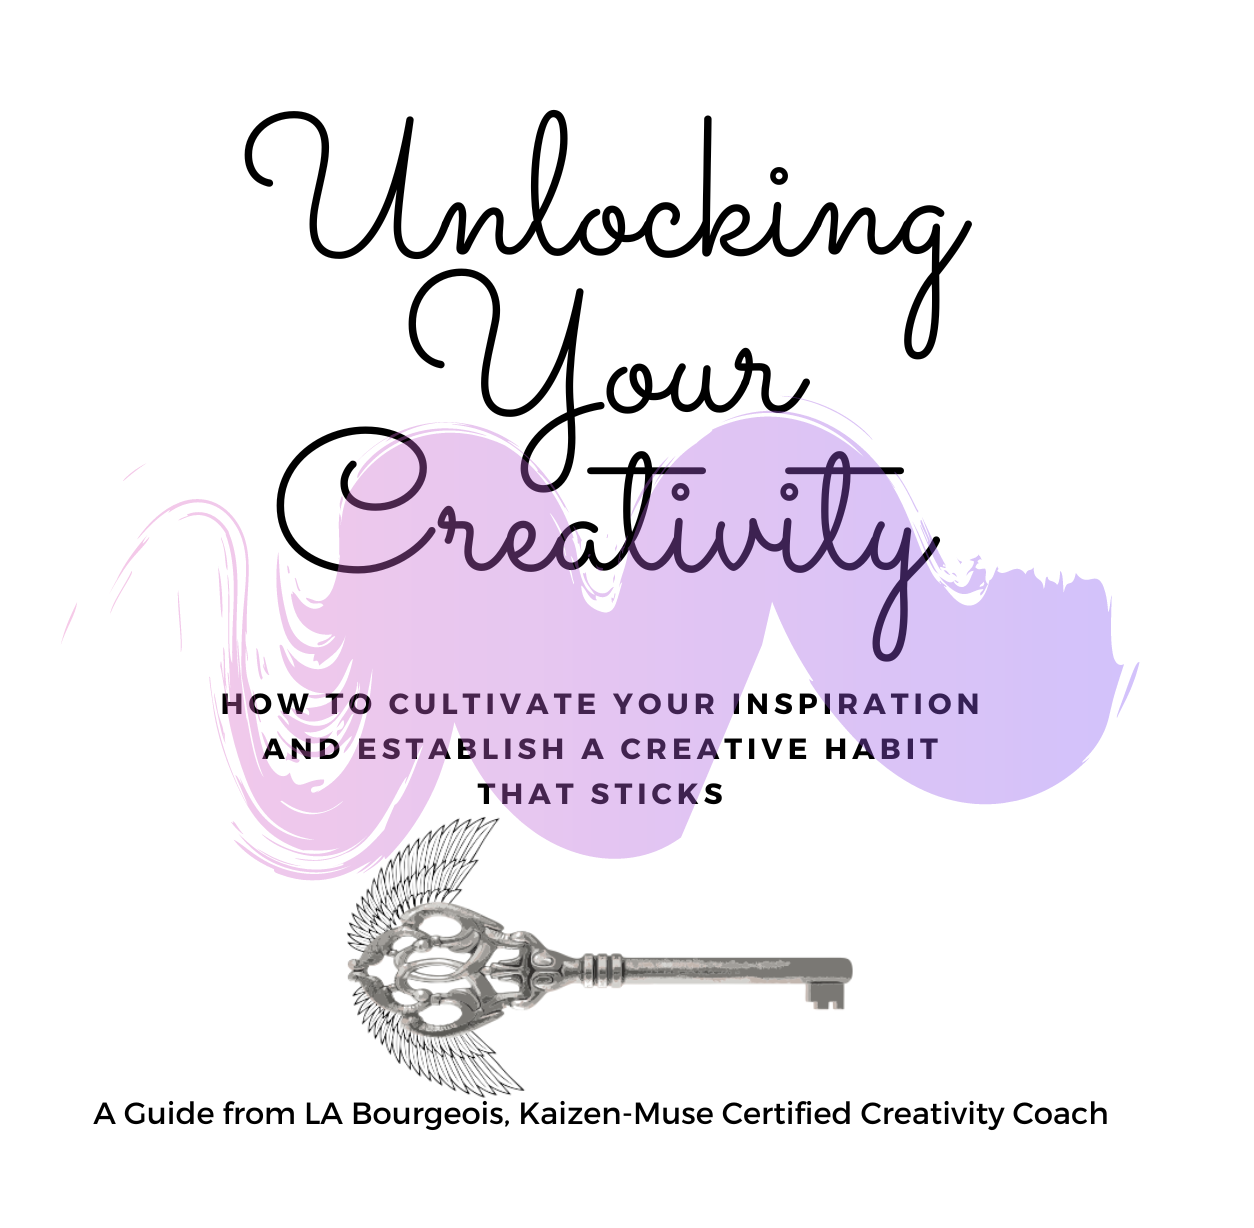 Unlock Your Creativity: How to cultivate your inspiration and establish a creative habit that sticks by LA Bourgeois